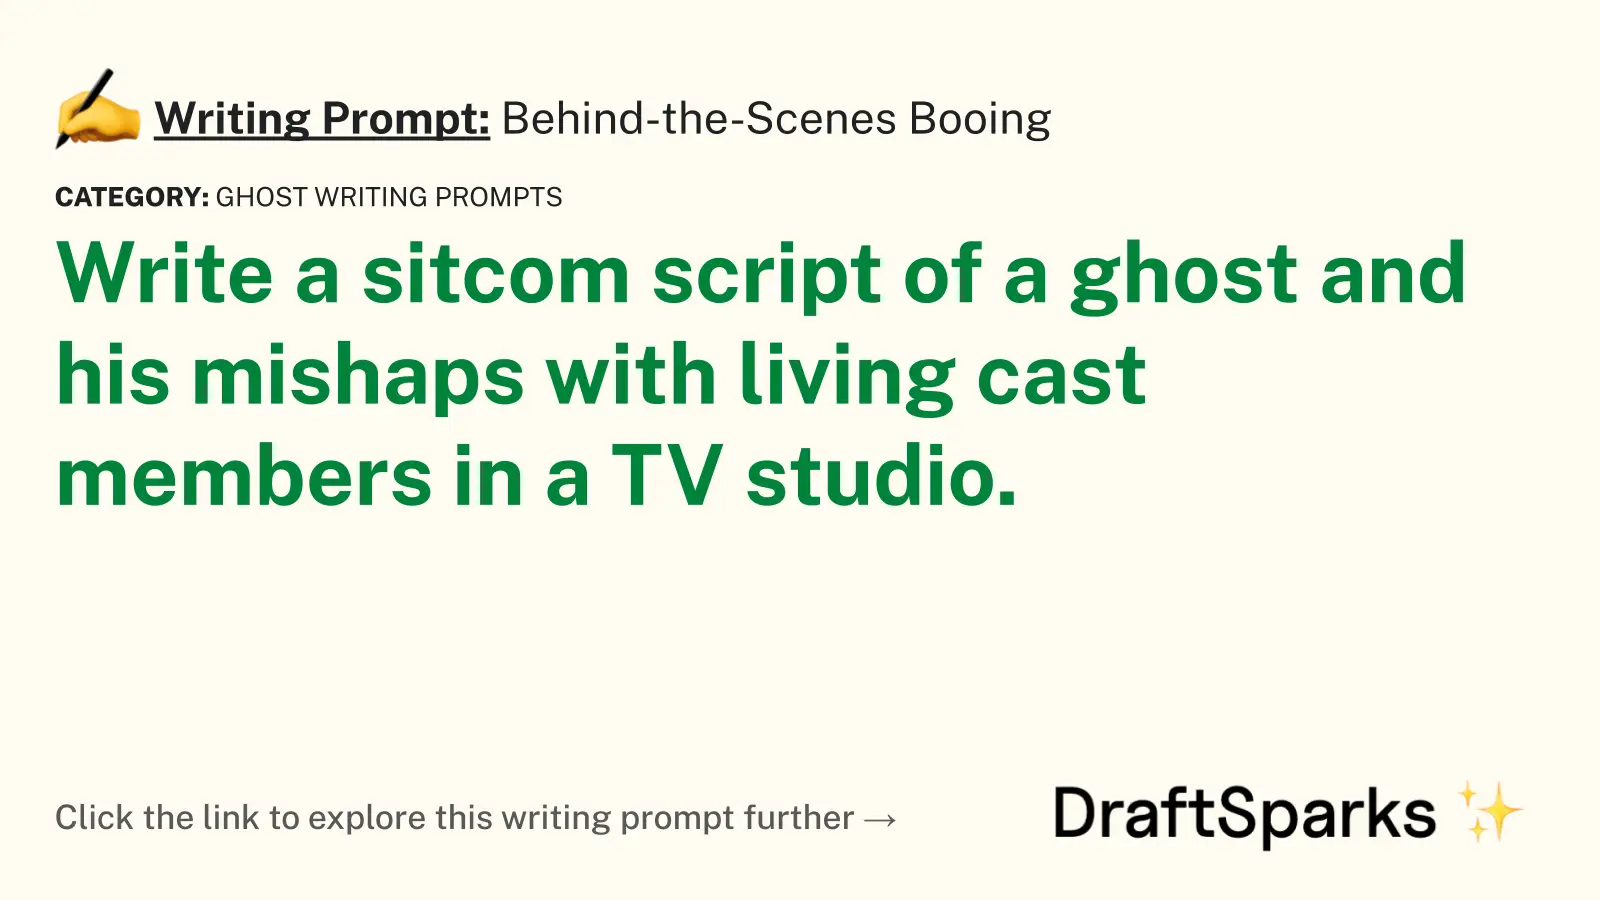 Behind-the-Scenes Booing